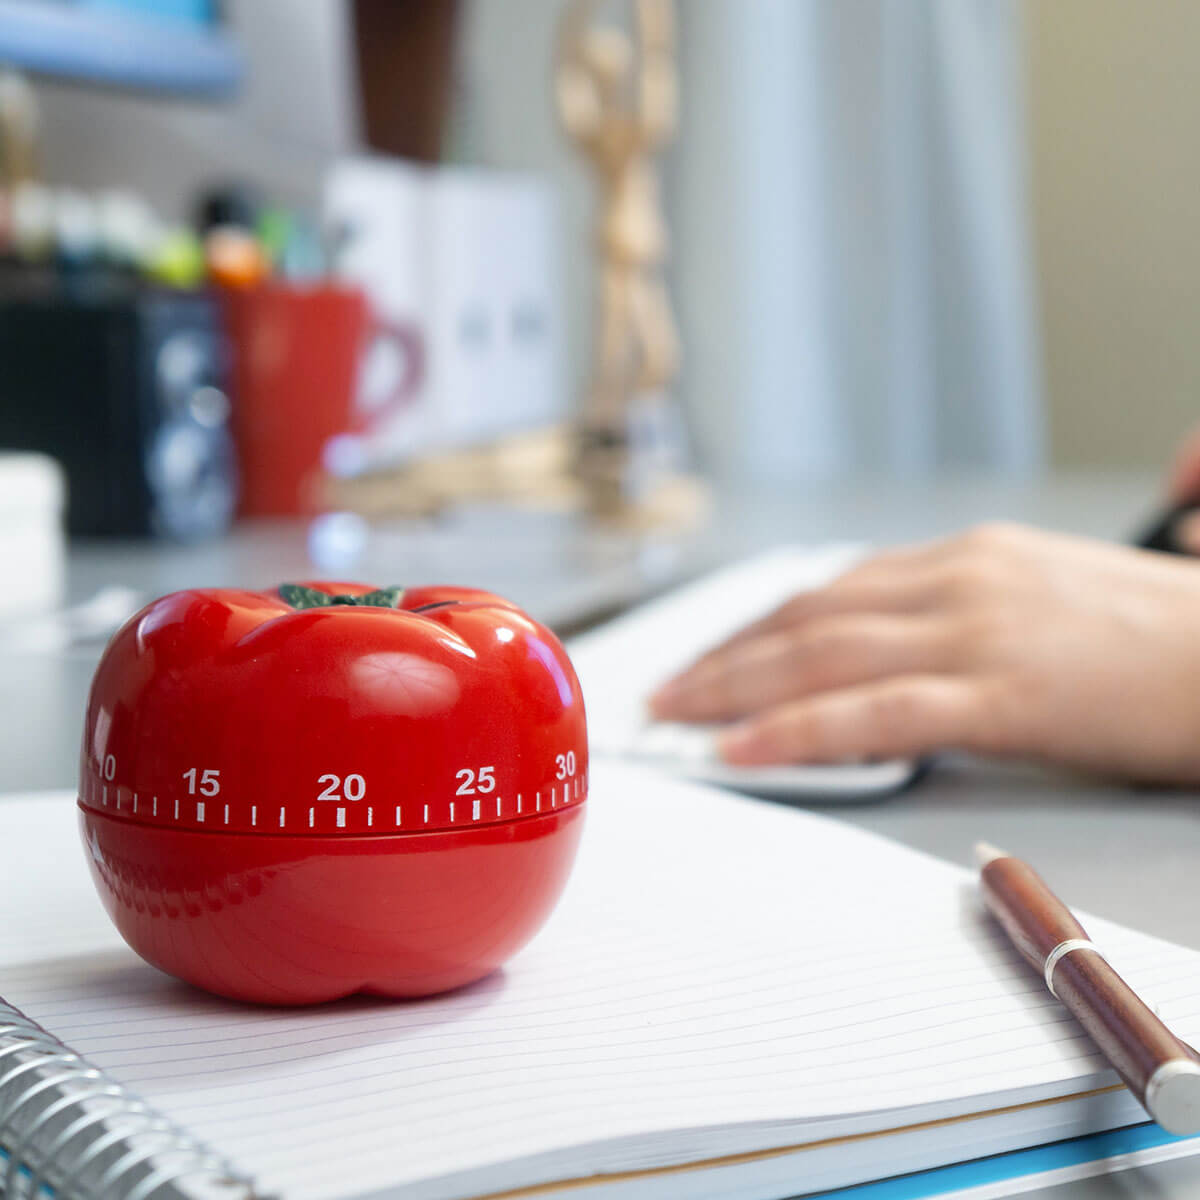 What Is The Pomodoro Technique and How Does it Work?